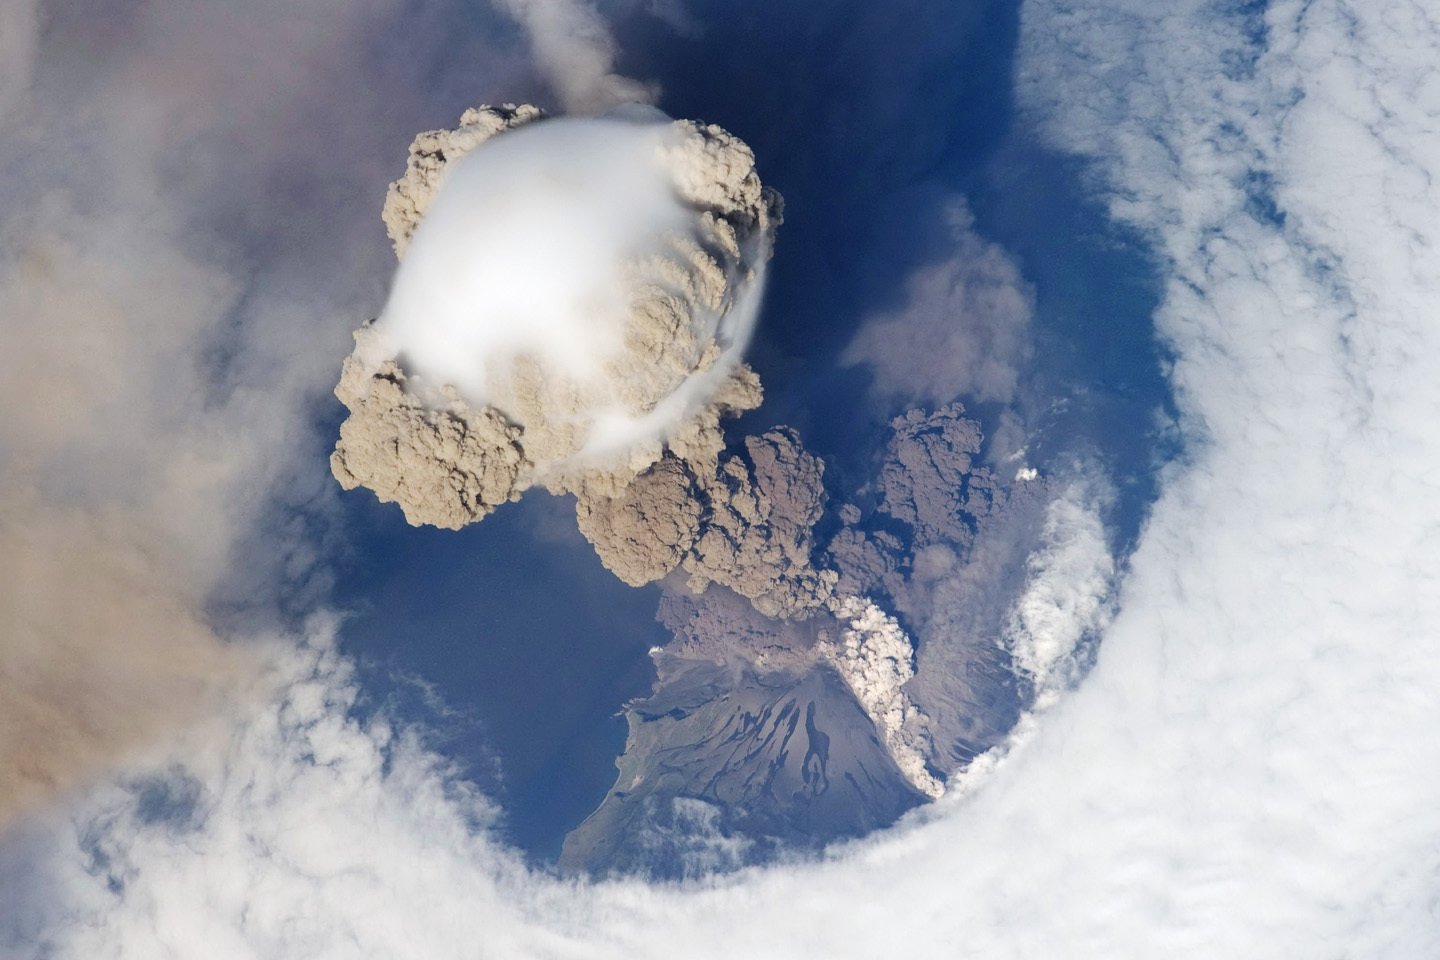 The Sarychev volcano in Russia erupting, as seen from the International Space Station. (It's not a supervolcano; such an eruption hasn't happened in modern history.)